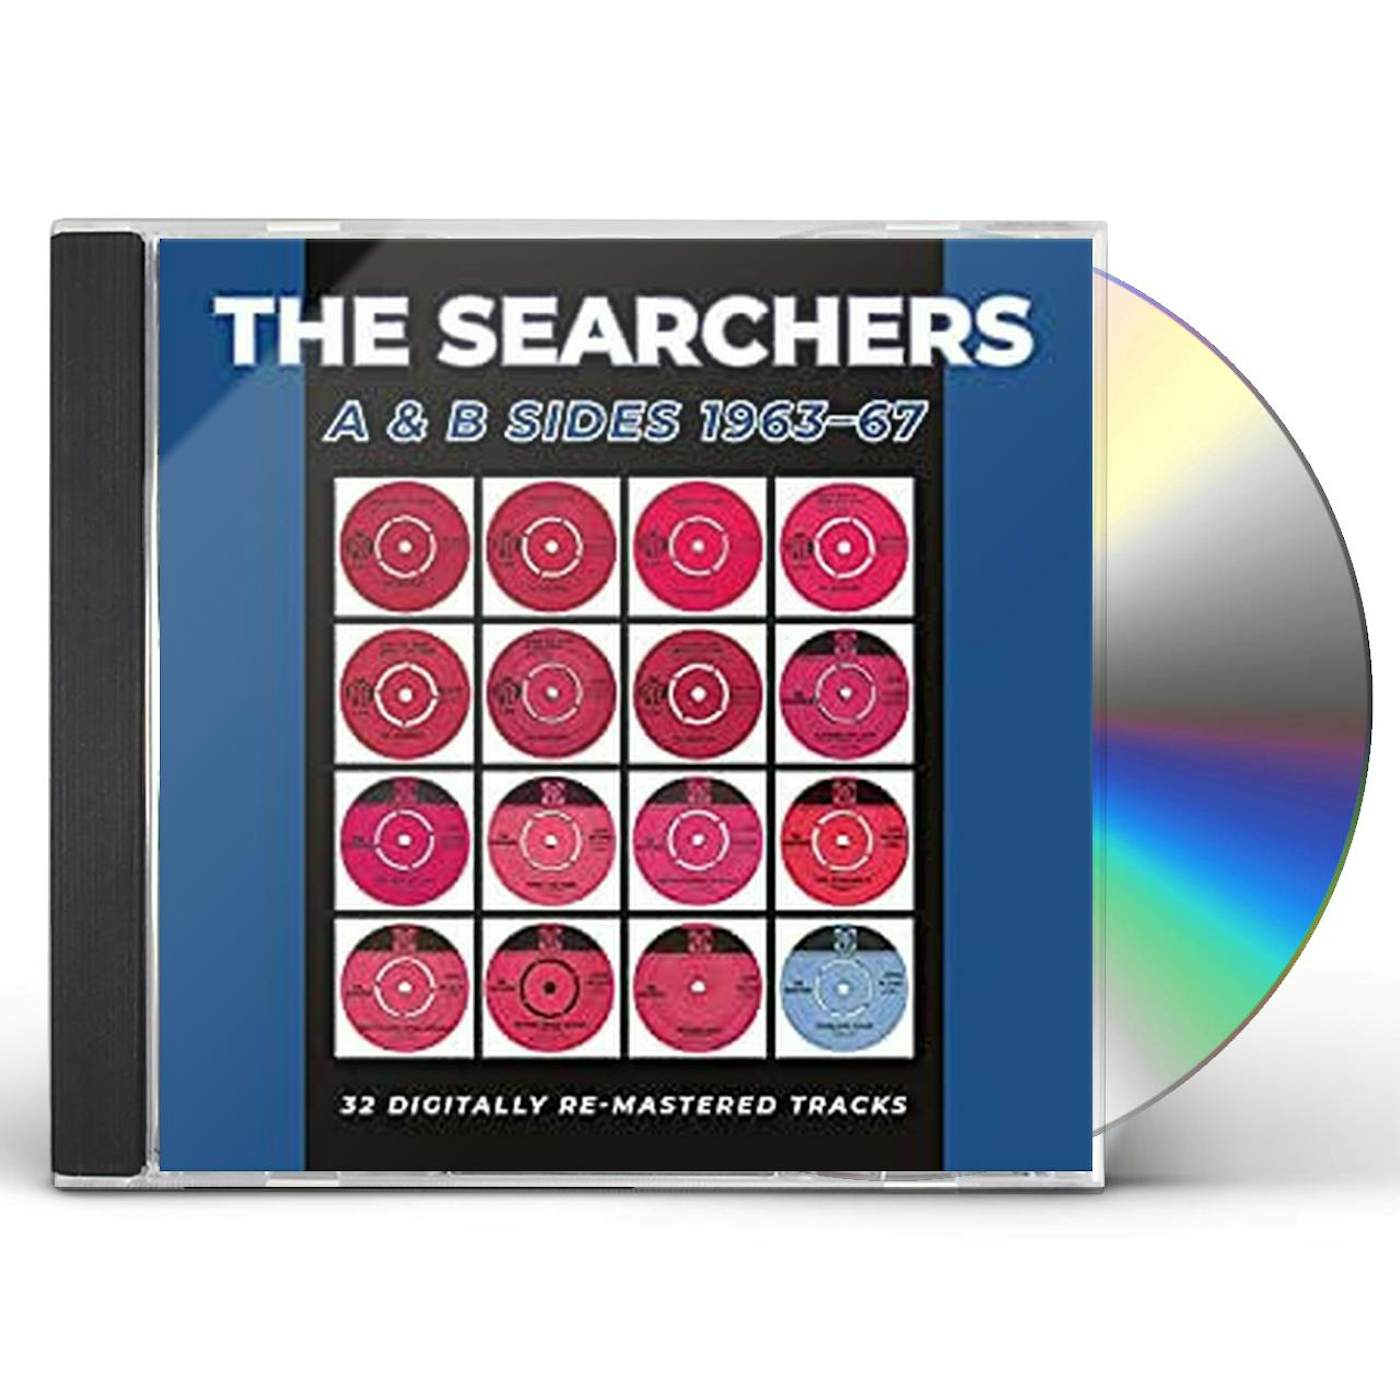 The Searchers A & B SIDES 1963-67 CD